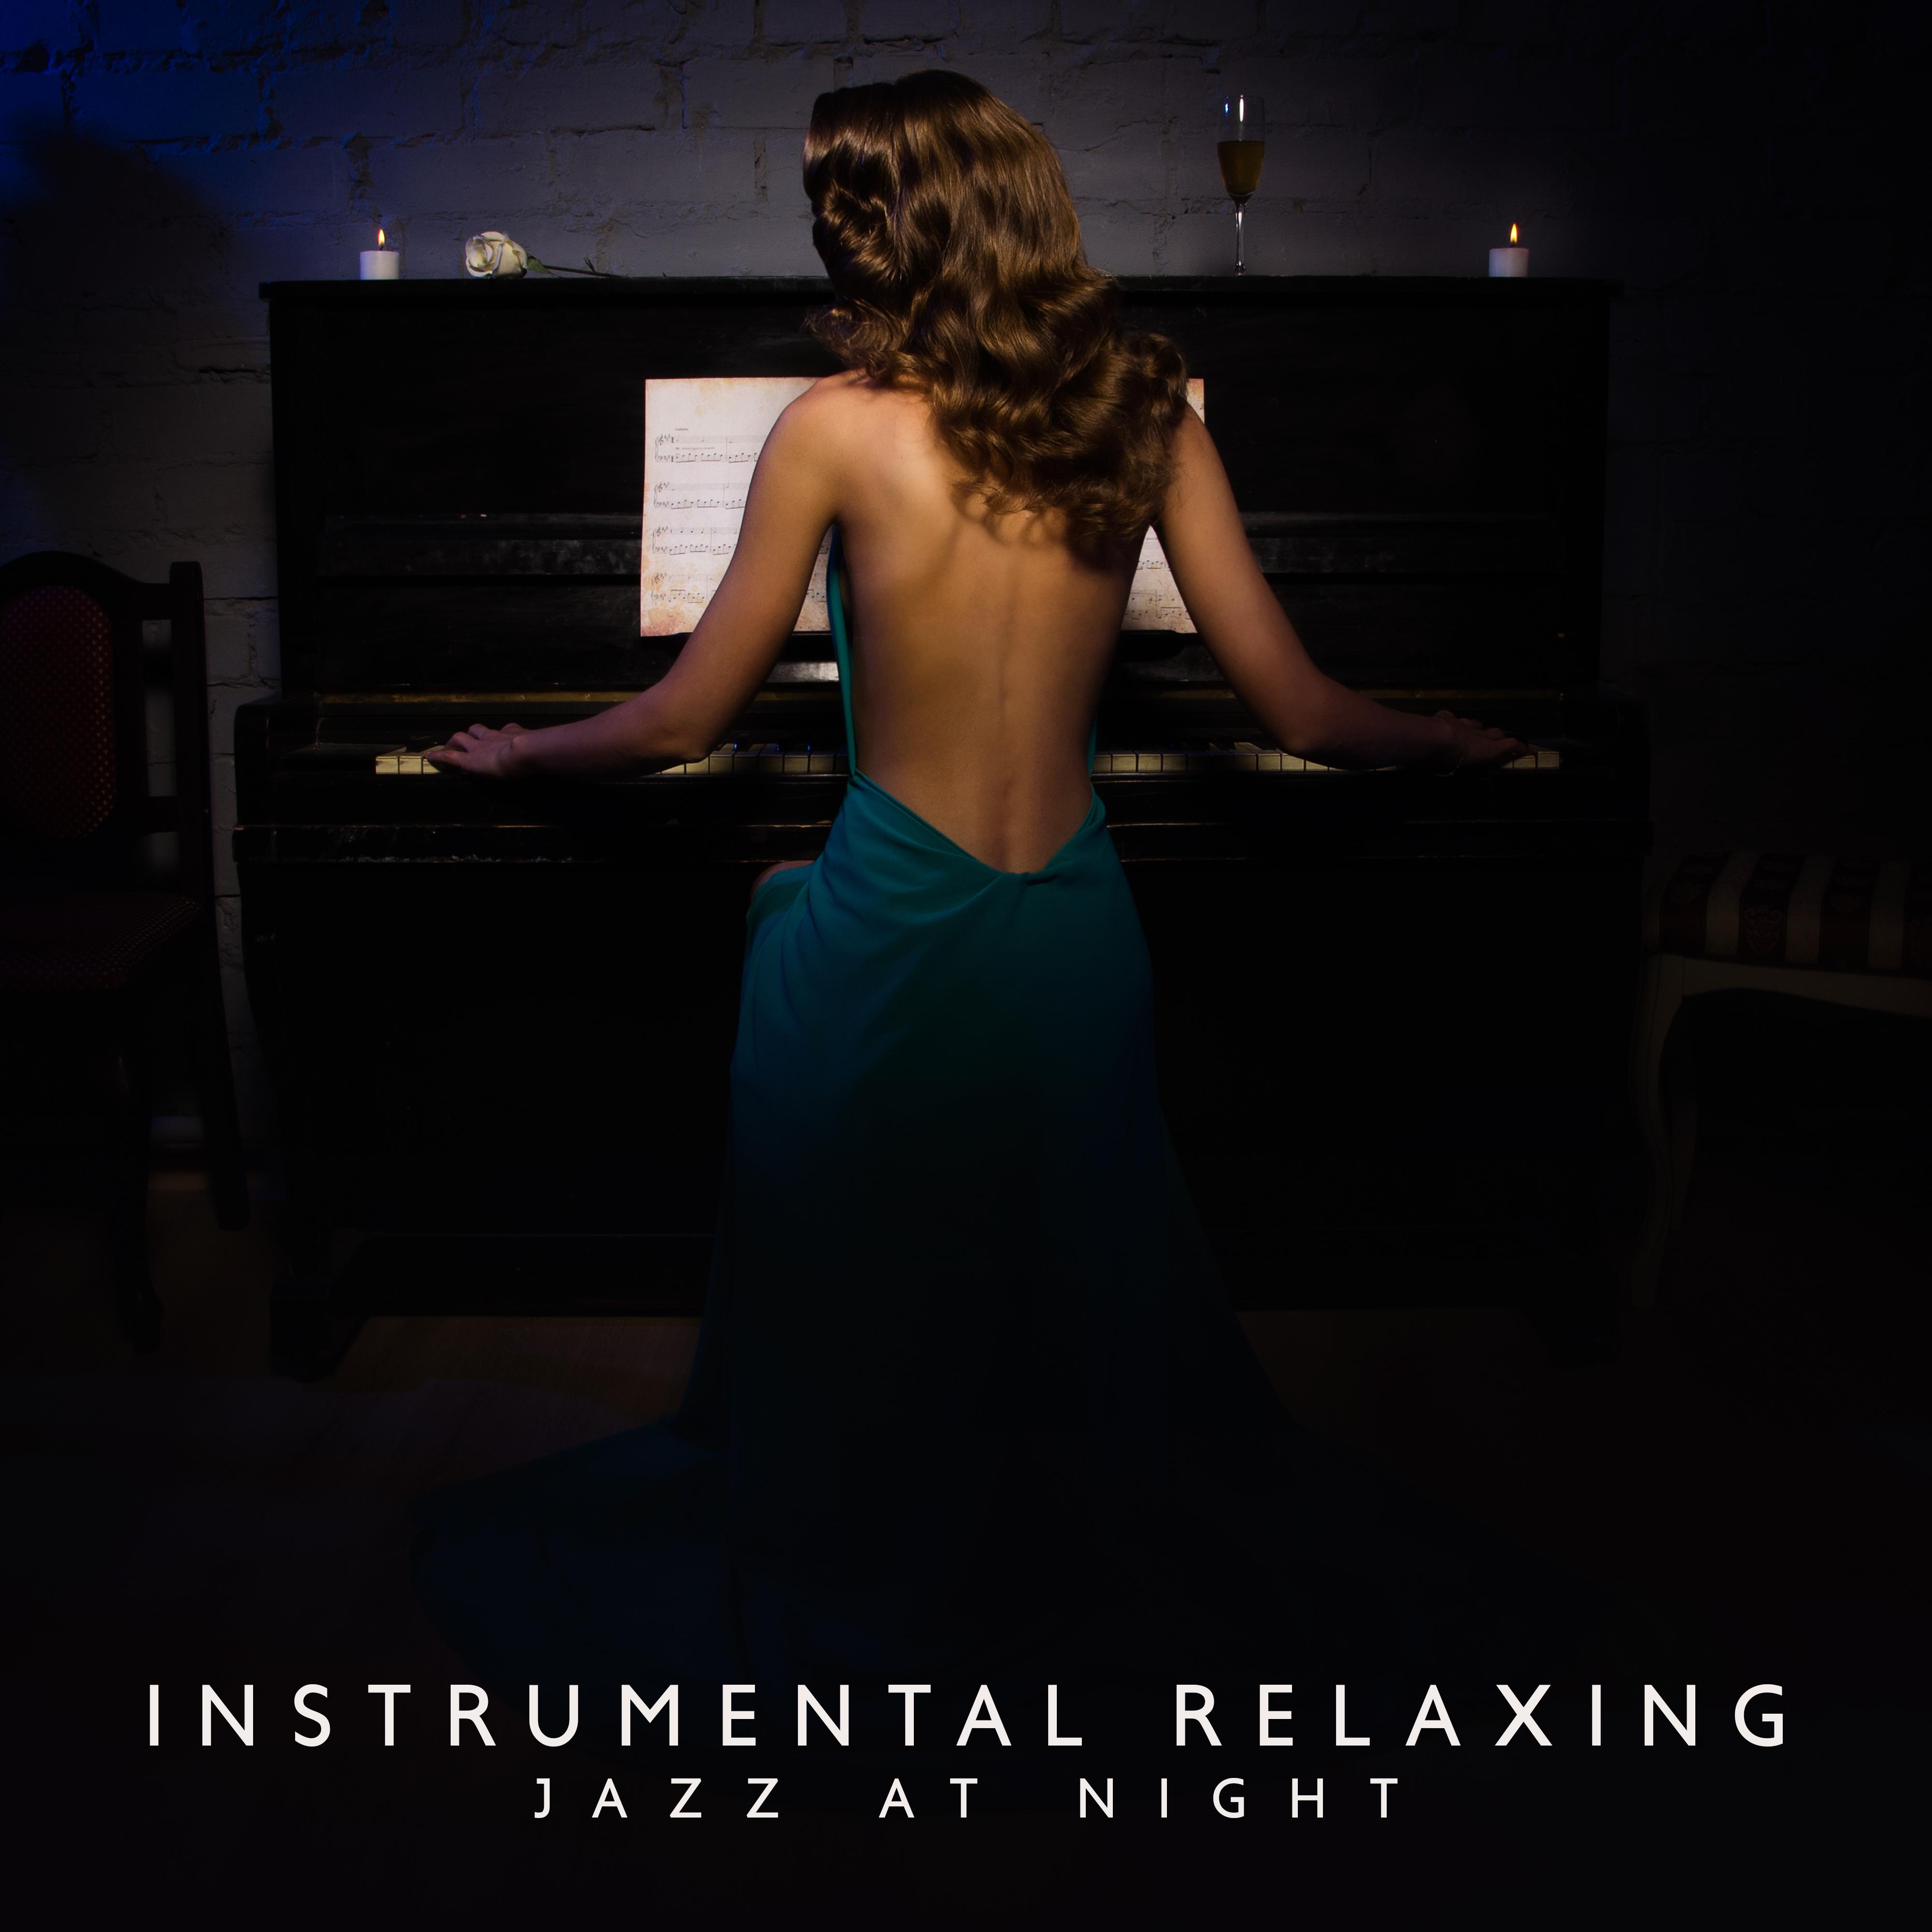 Instrumental Relaxing Jazz at Night  Classical Jazz to Rest, Jazz Club, Smooth Music for Party, Jazz Lounge, Party Hits